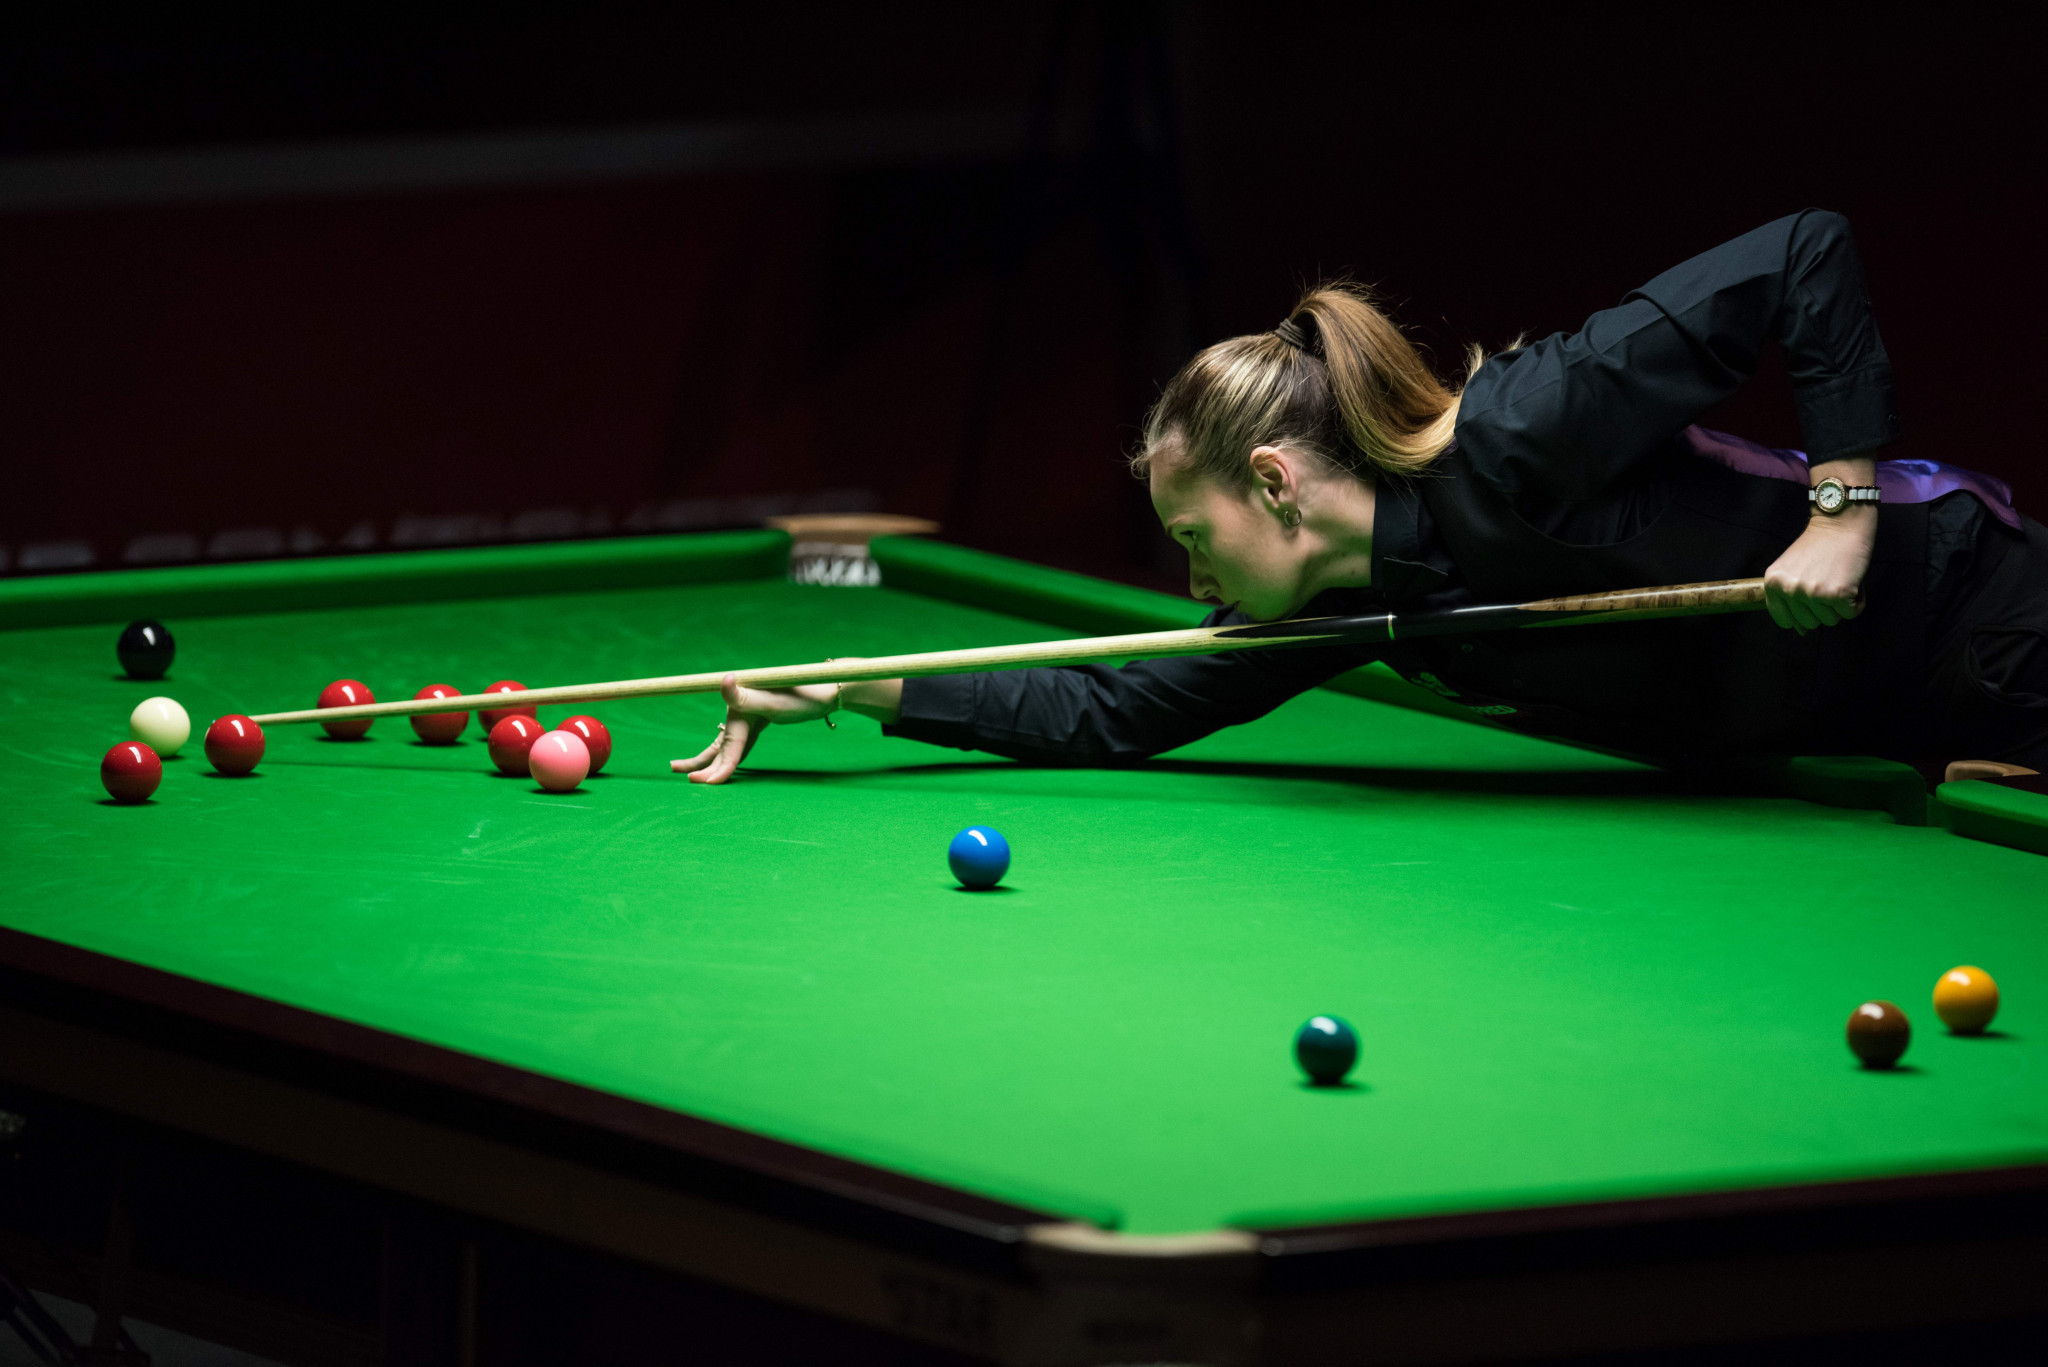 Defending champion Evans reaches last 16 of World Women’s Snooker Championship as group stage concludes